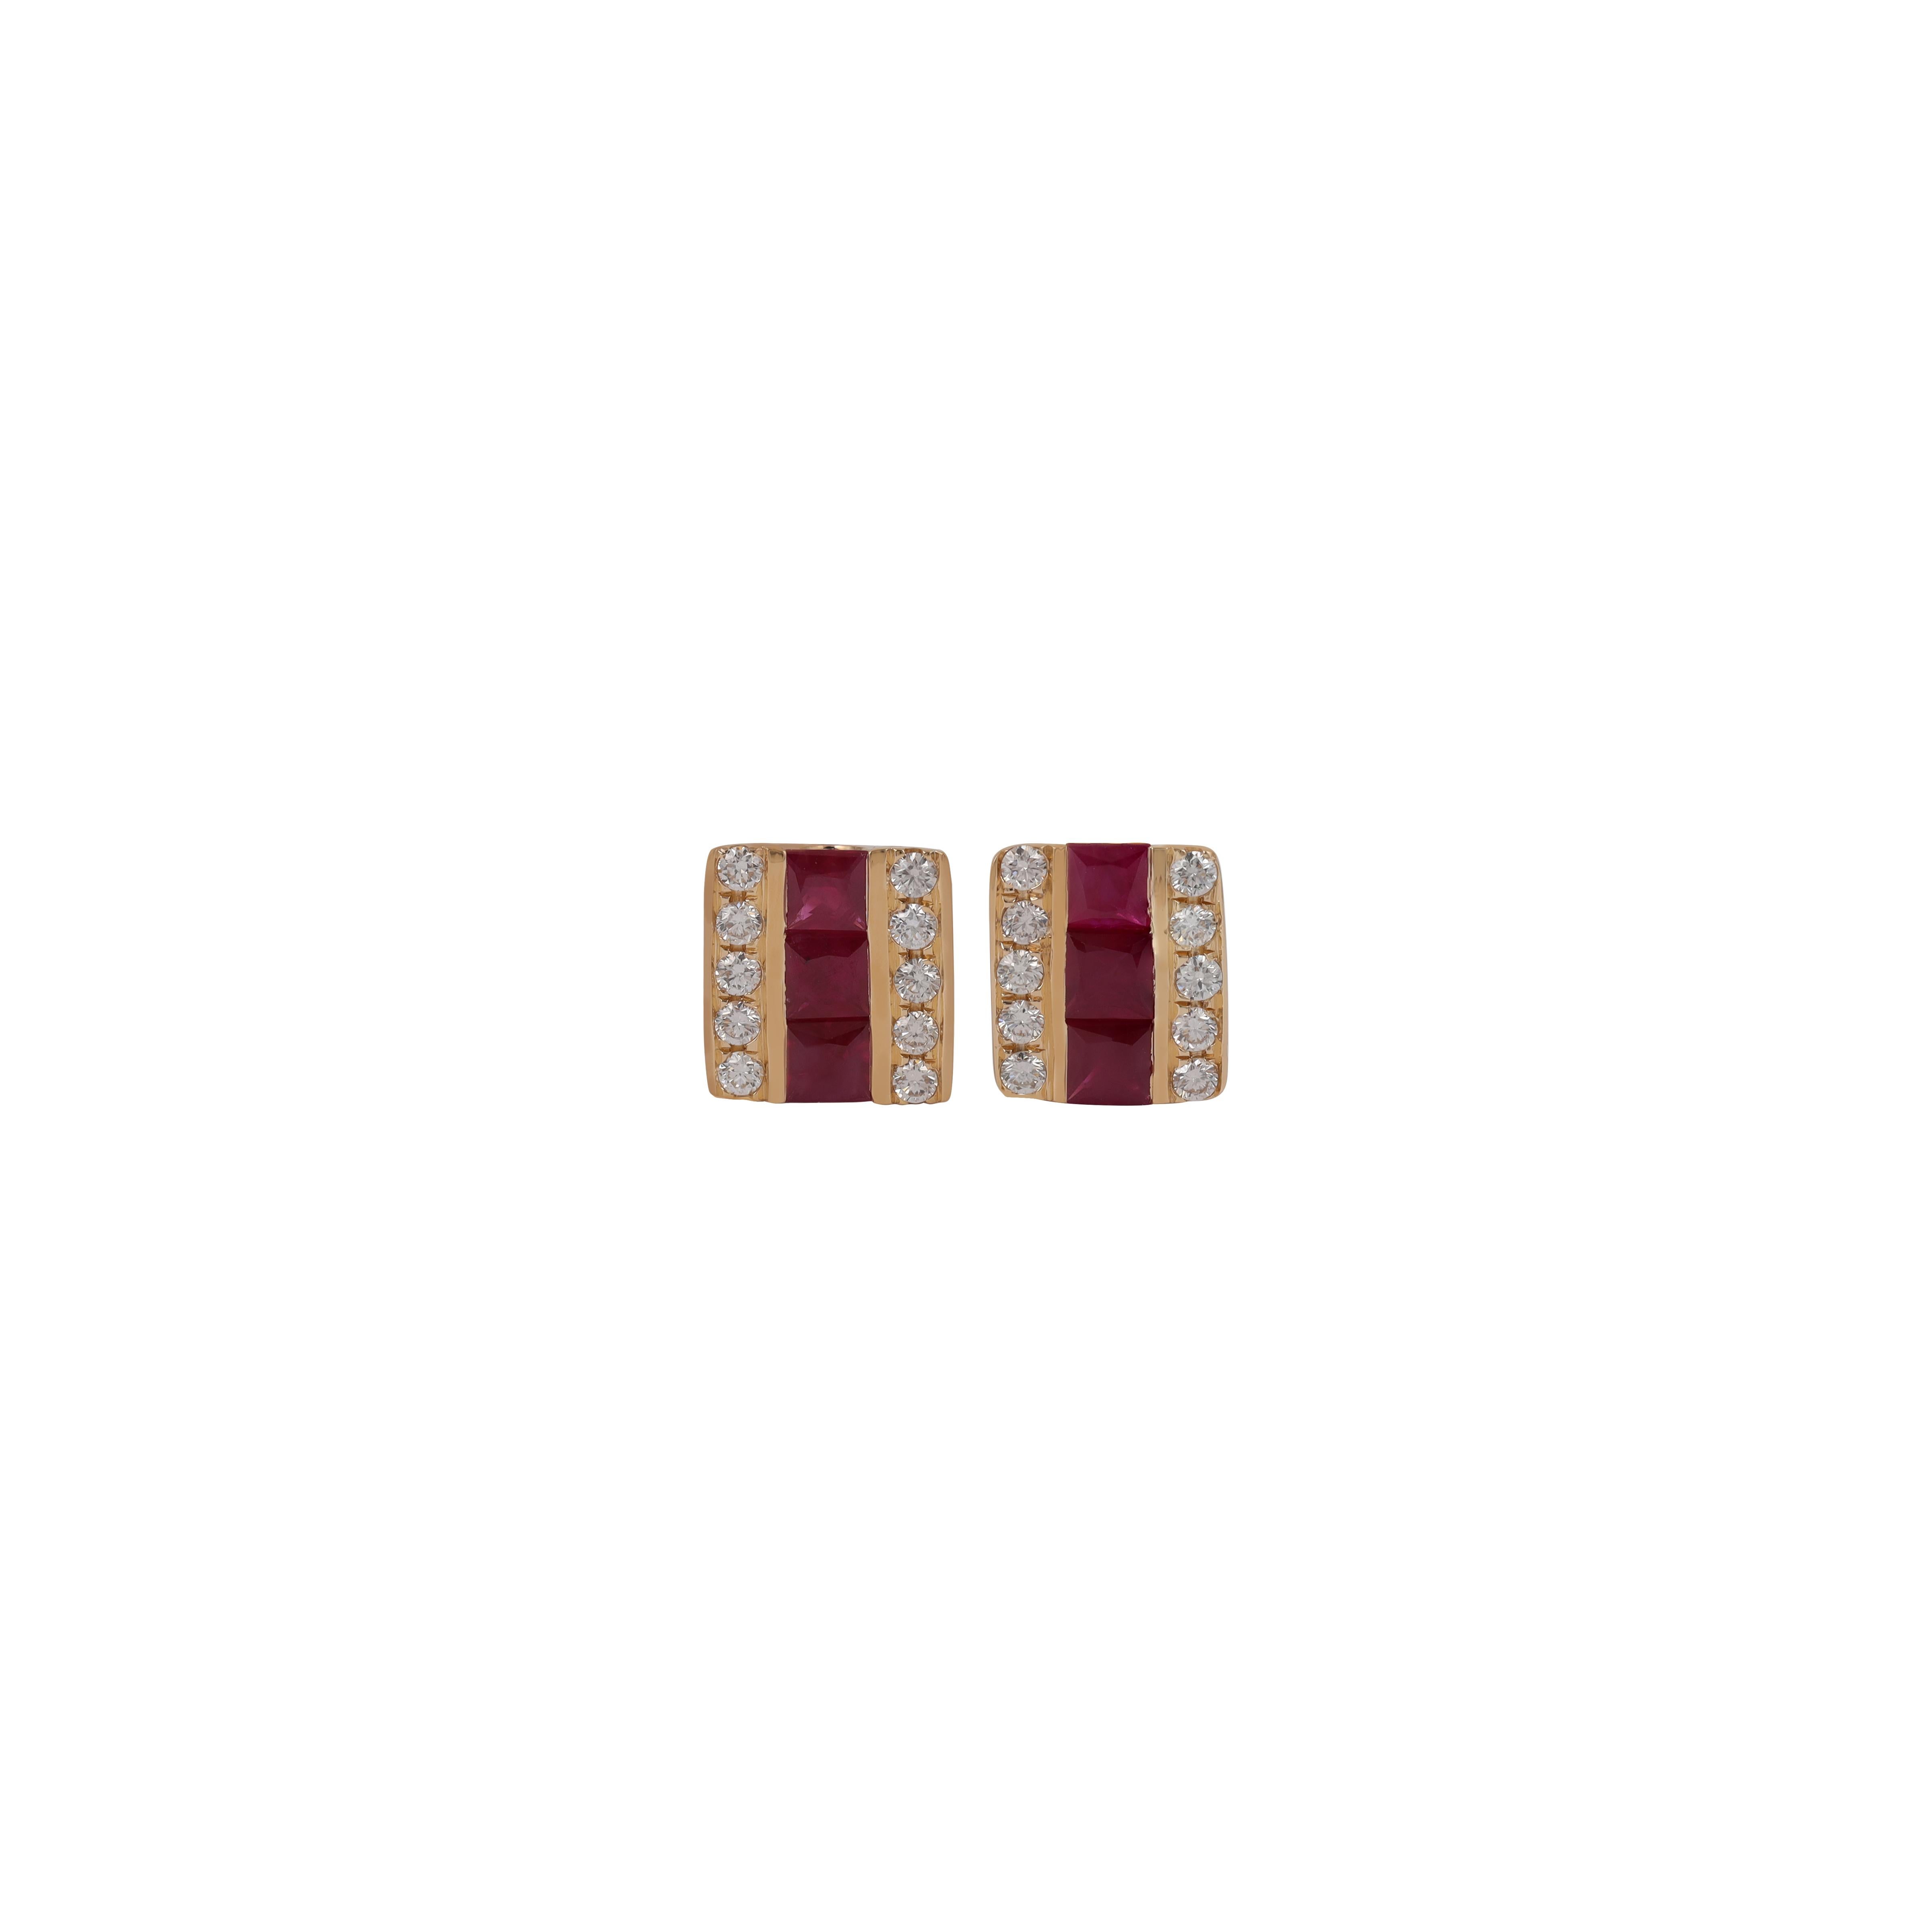 This is an elegant Stud earring pair with Burma Ruby  & diamonds feature 6 pieces  Burma Ruby  weight 1.18 carats, 20 pieces of  diamonds weight 0.30 carat , these earrings entirely made in 18K Yellow gold weight 3.09 grams.